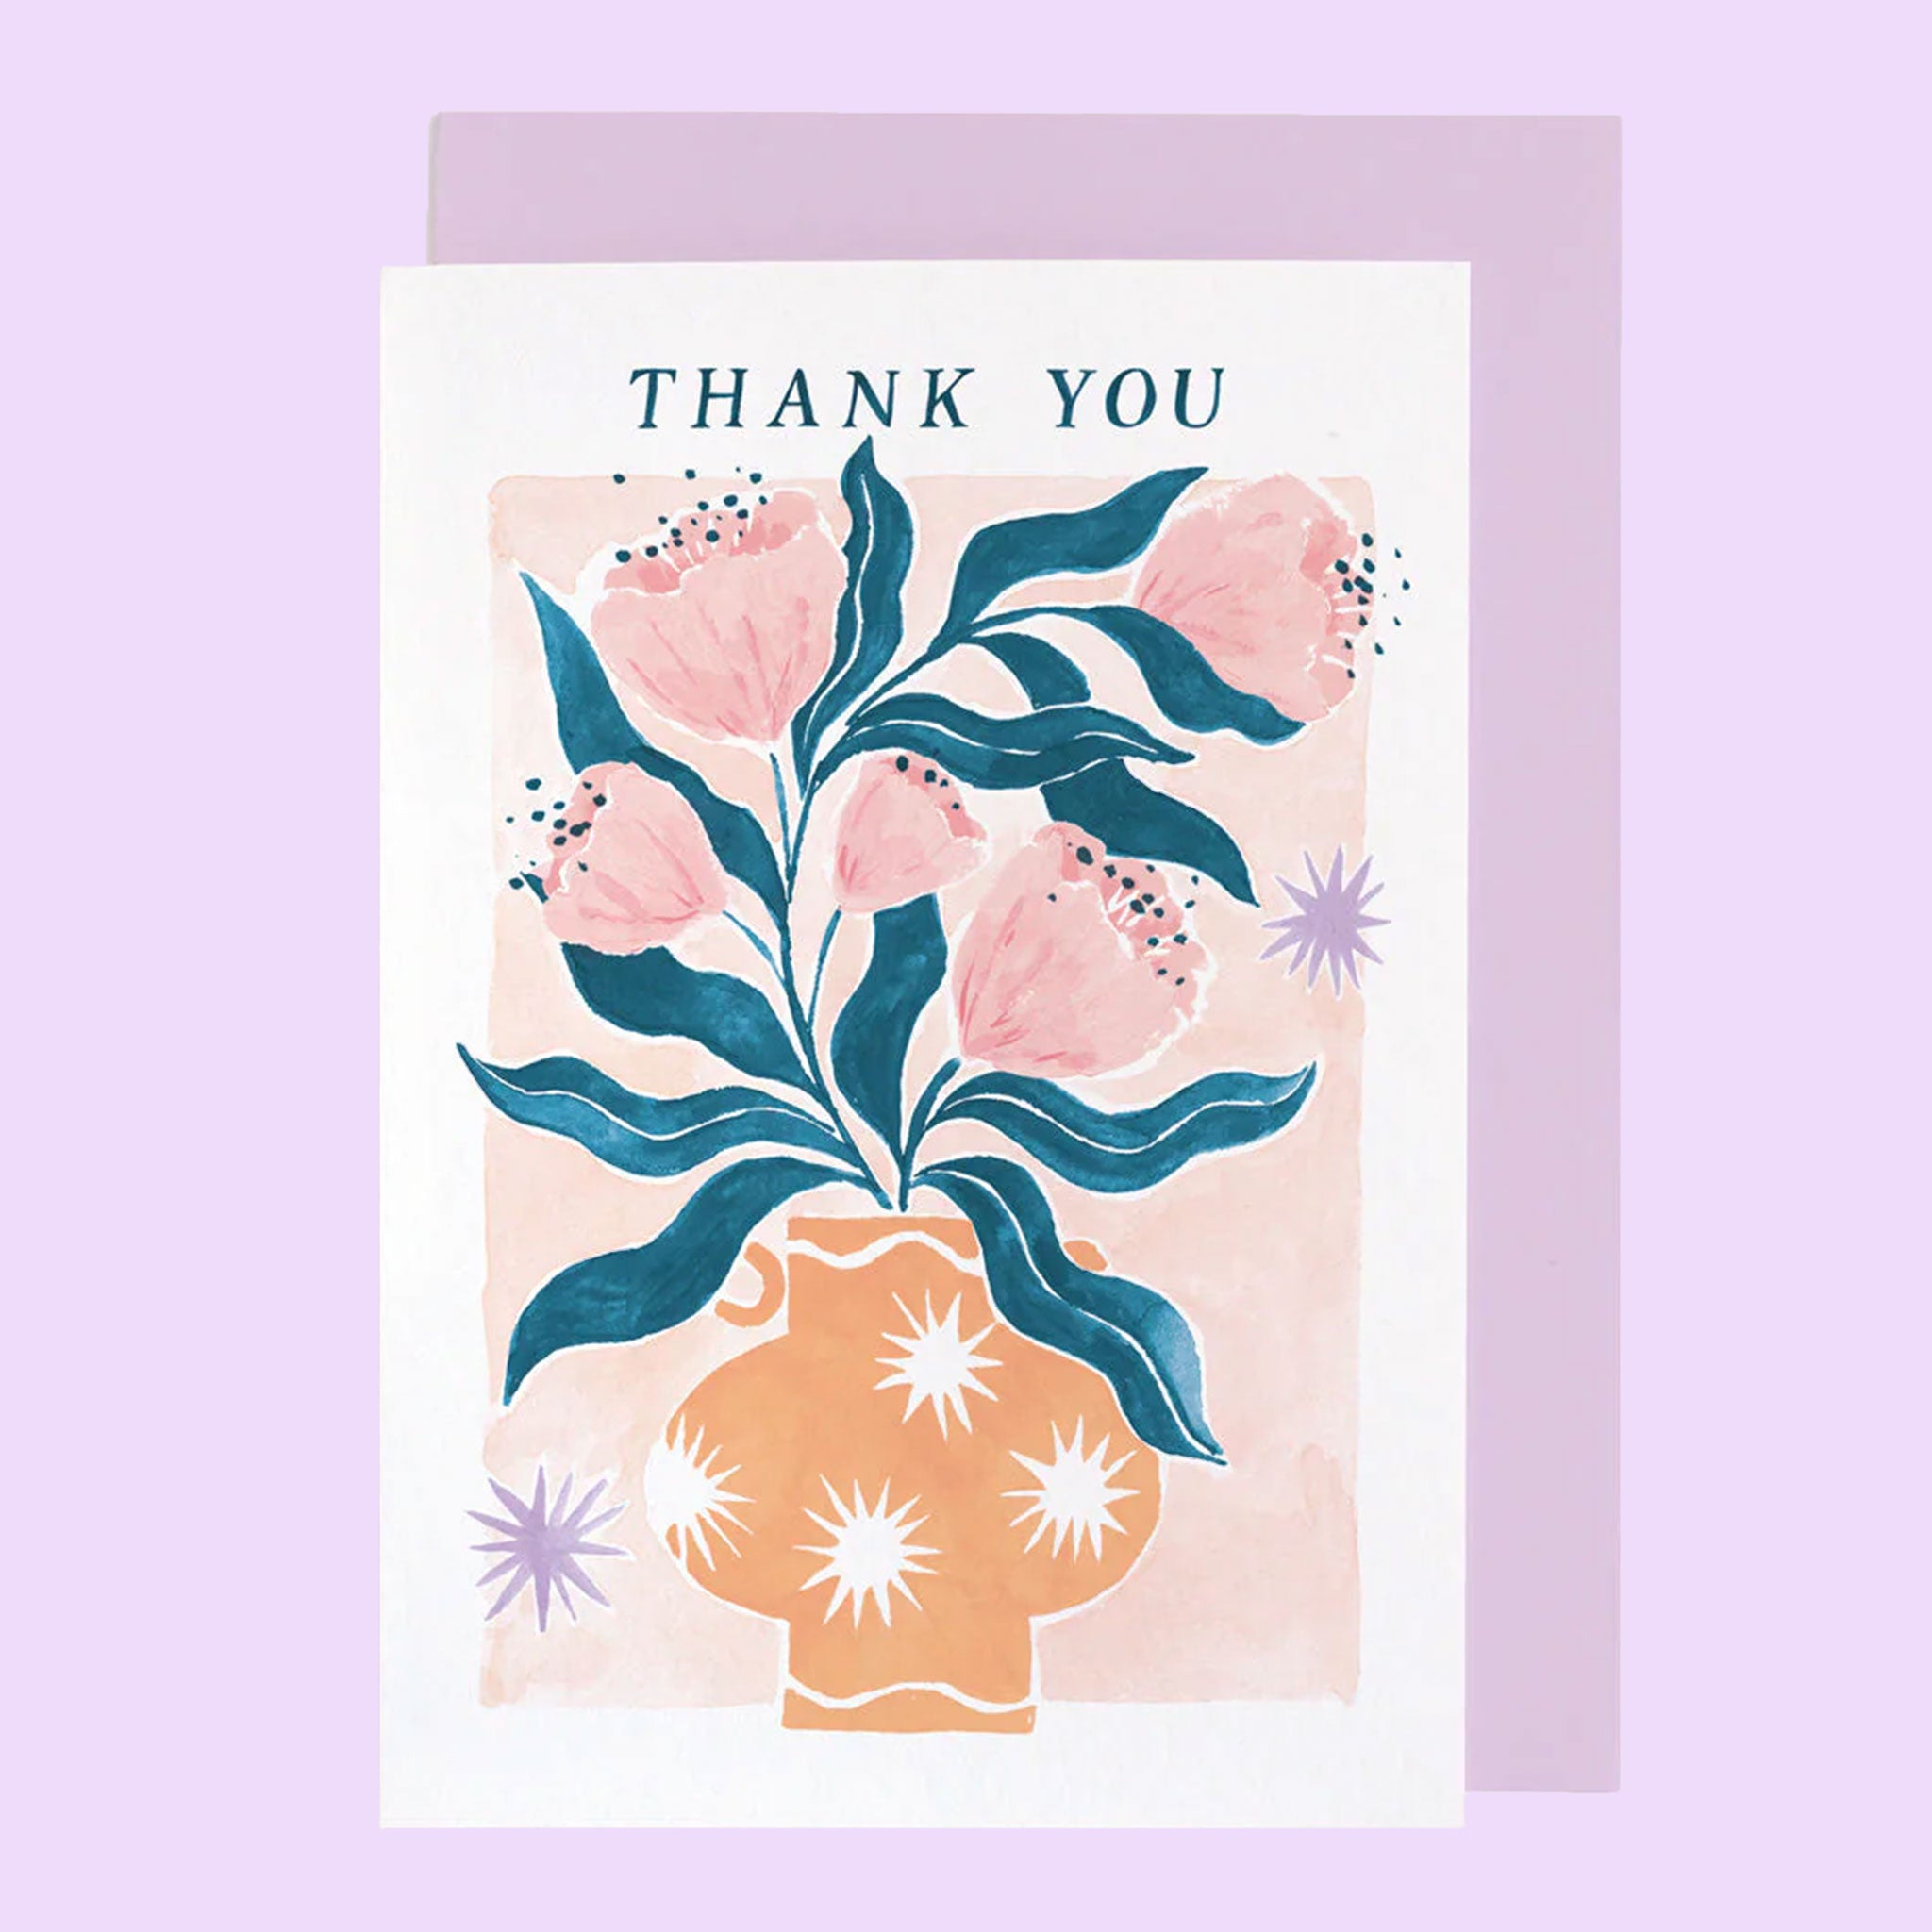 On a neutral background is a card with an illustration of a vase and flowers and text above that reads, "Thank You".